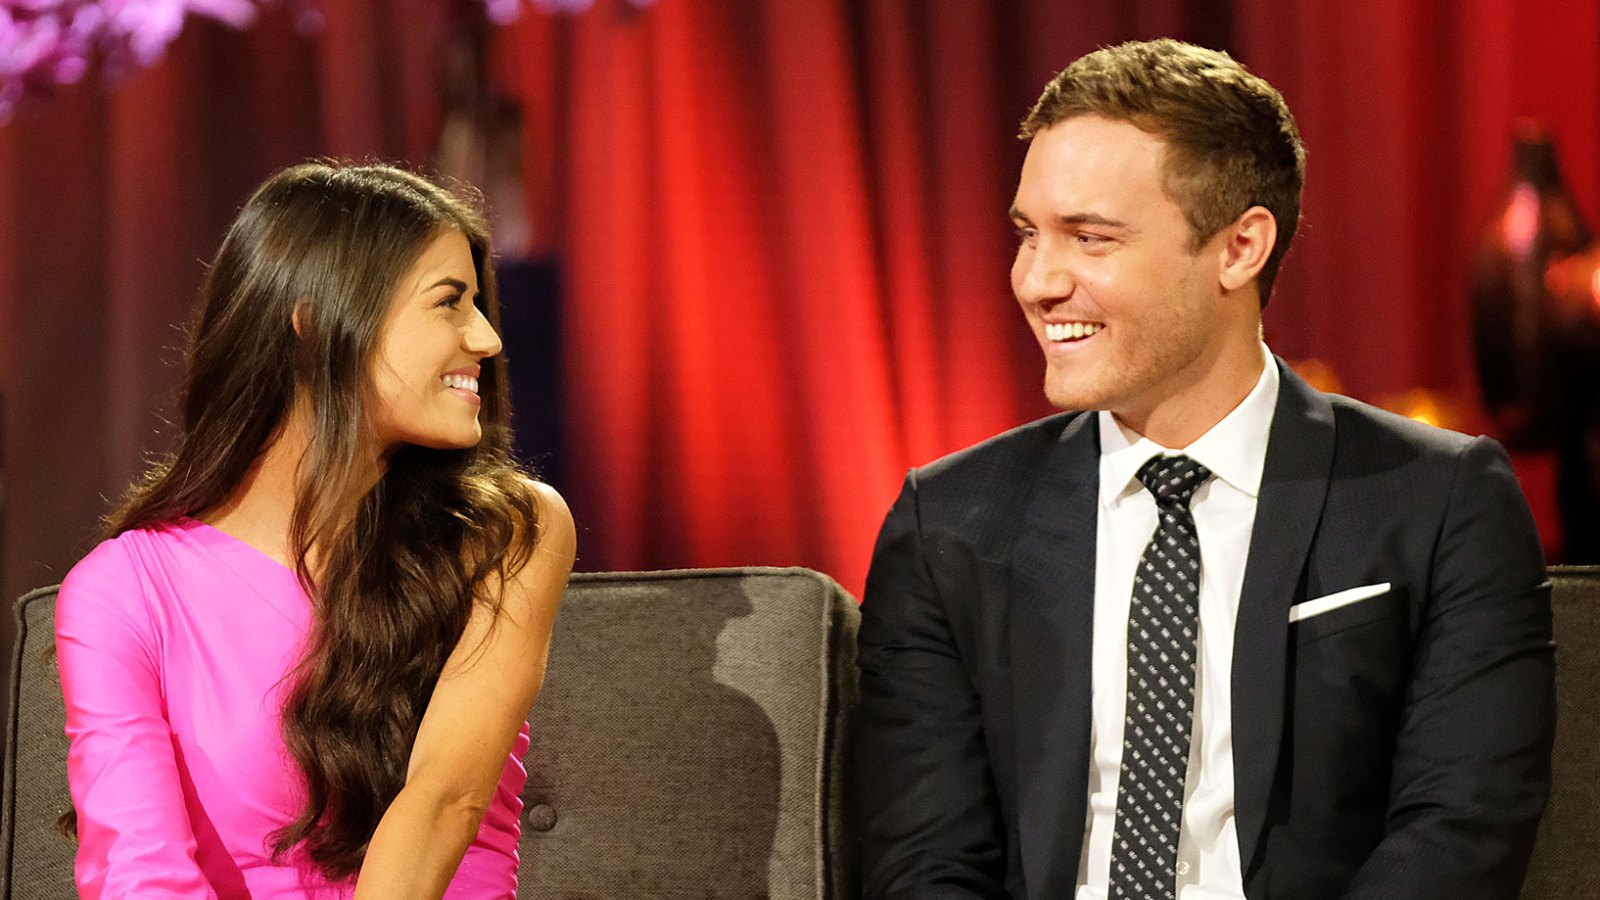 Peter Weber Clarifies His Relationship With Madison Prewett After The Bachelor